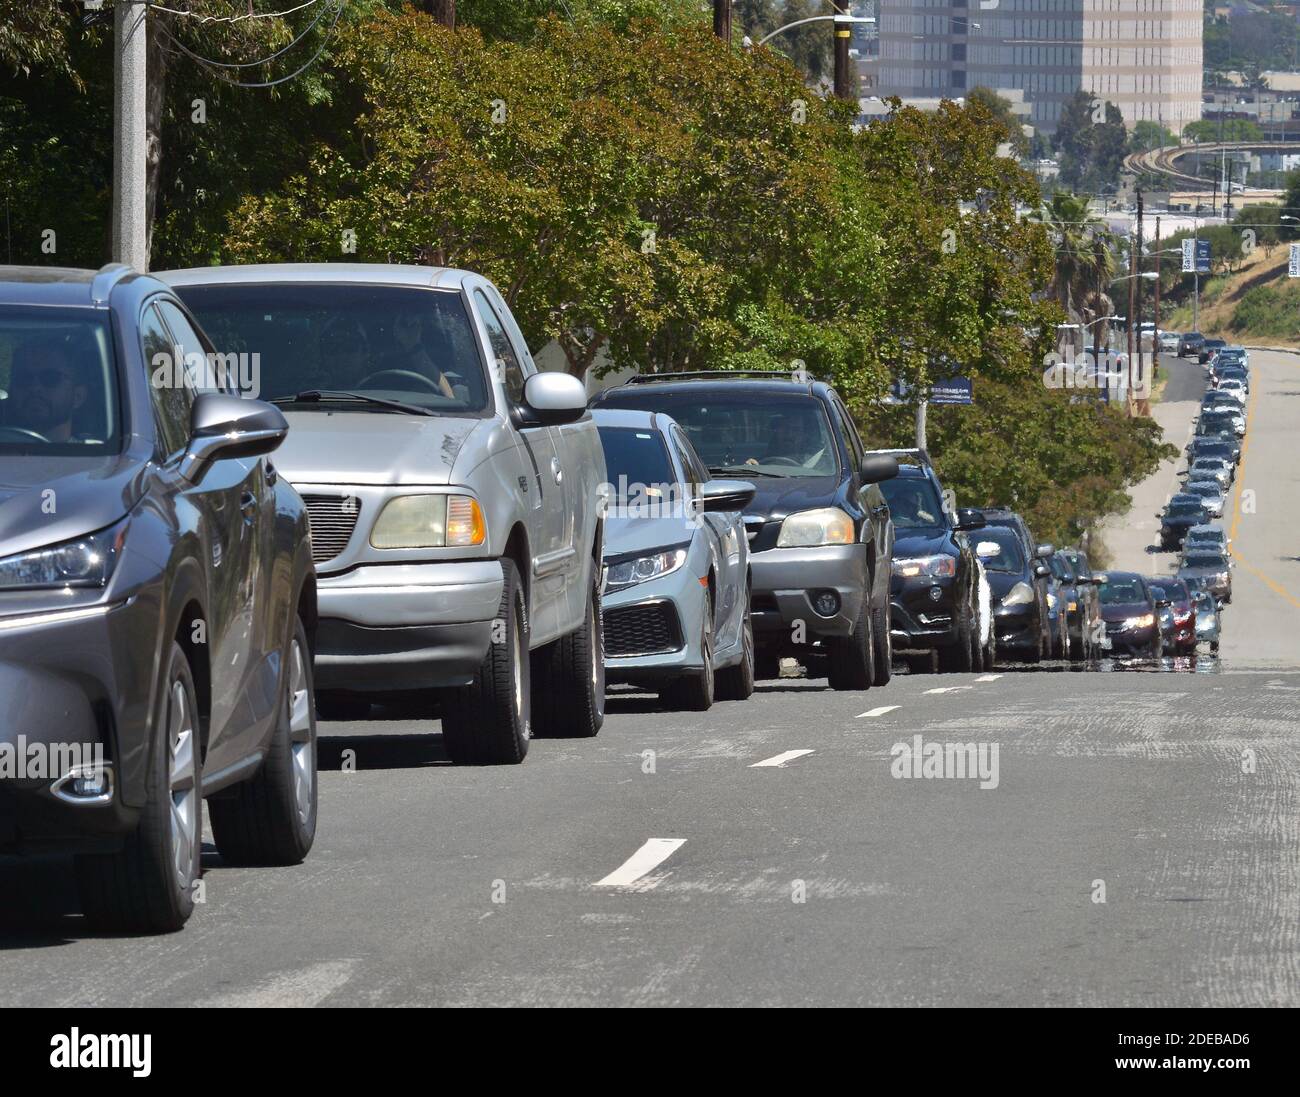 A mile-long line of vehicles waiting to enter a new COVID-19 testing site at Dodger Stadium in Los Angeles on Tuesday, May 26, 2020. In announcing the center on Friday, Mayor Eric Garcetti said health officials would be testing as many as 6,000 people a day at the new location, where he said he was tested for COVID-19 himself. City officials say they will accommodate three times more people than any other Los Angeles County testing site. Photo by Jim Ruymen/UPI Stock Photo